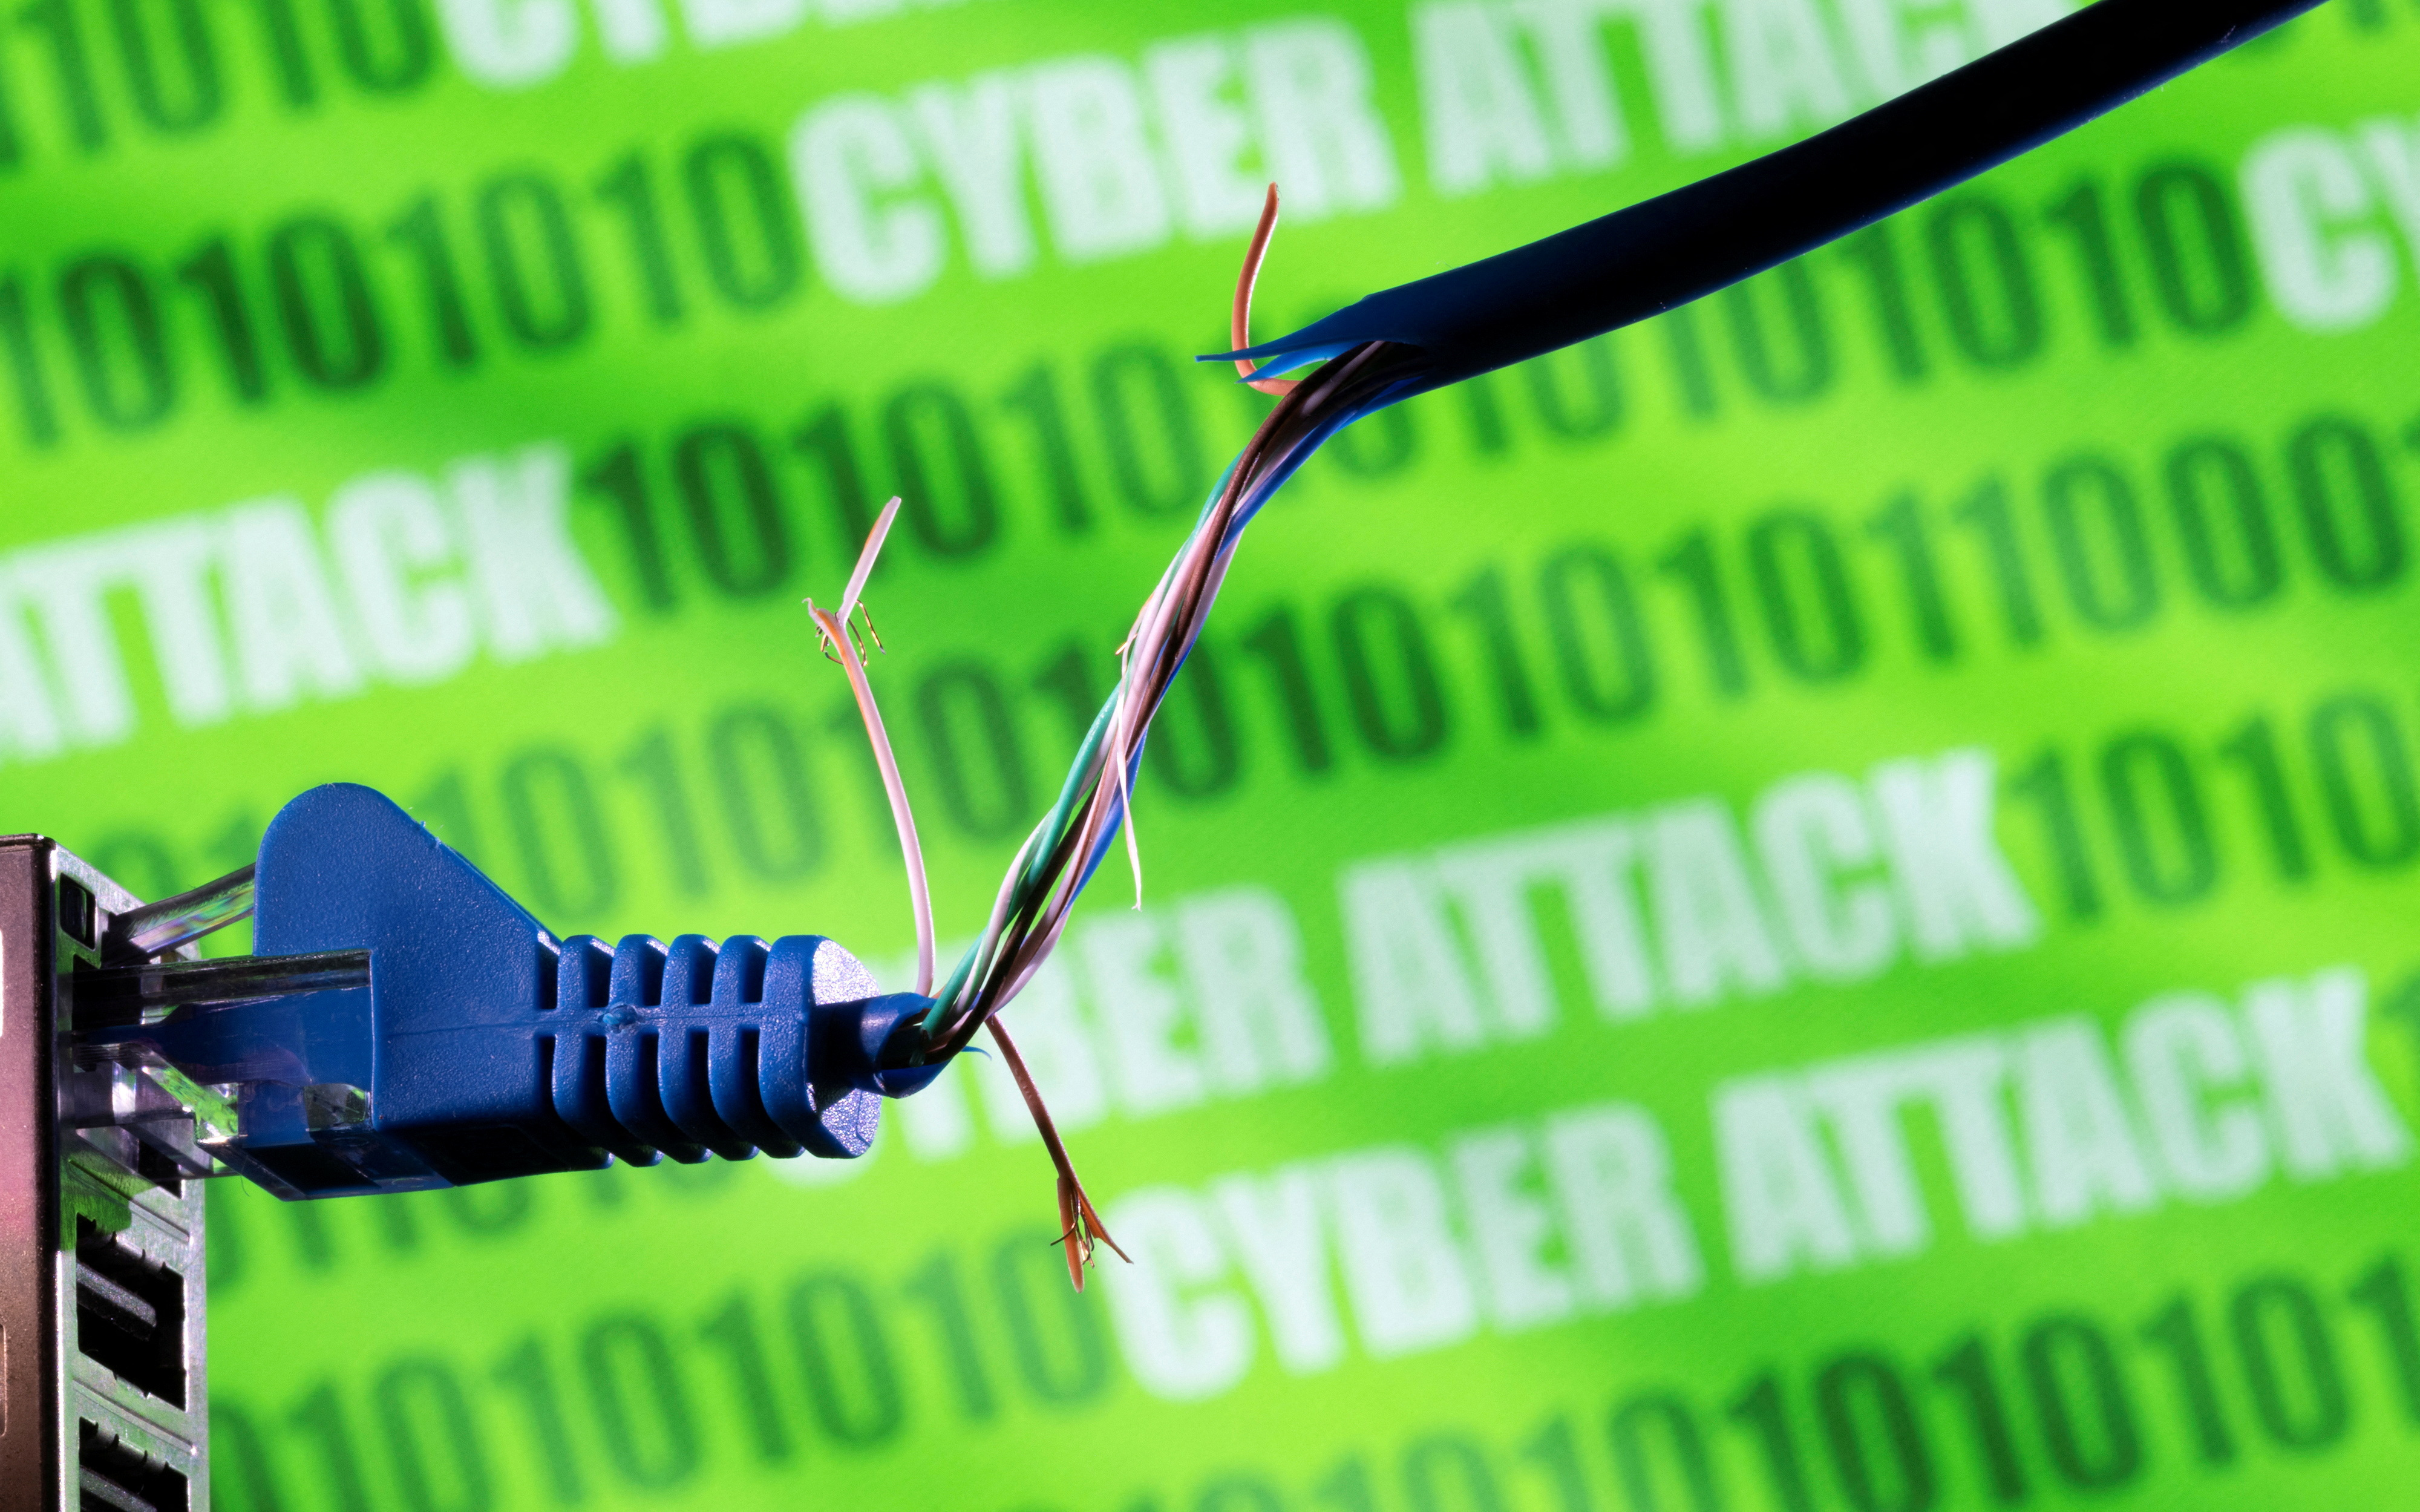 Illustration shows broken Ethernet cable, binary code and words "cyber attack\